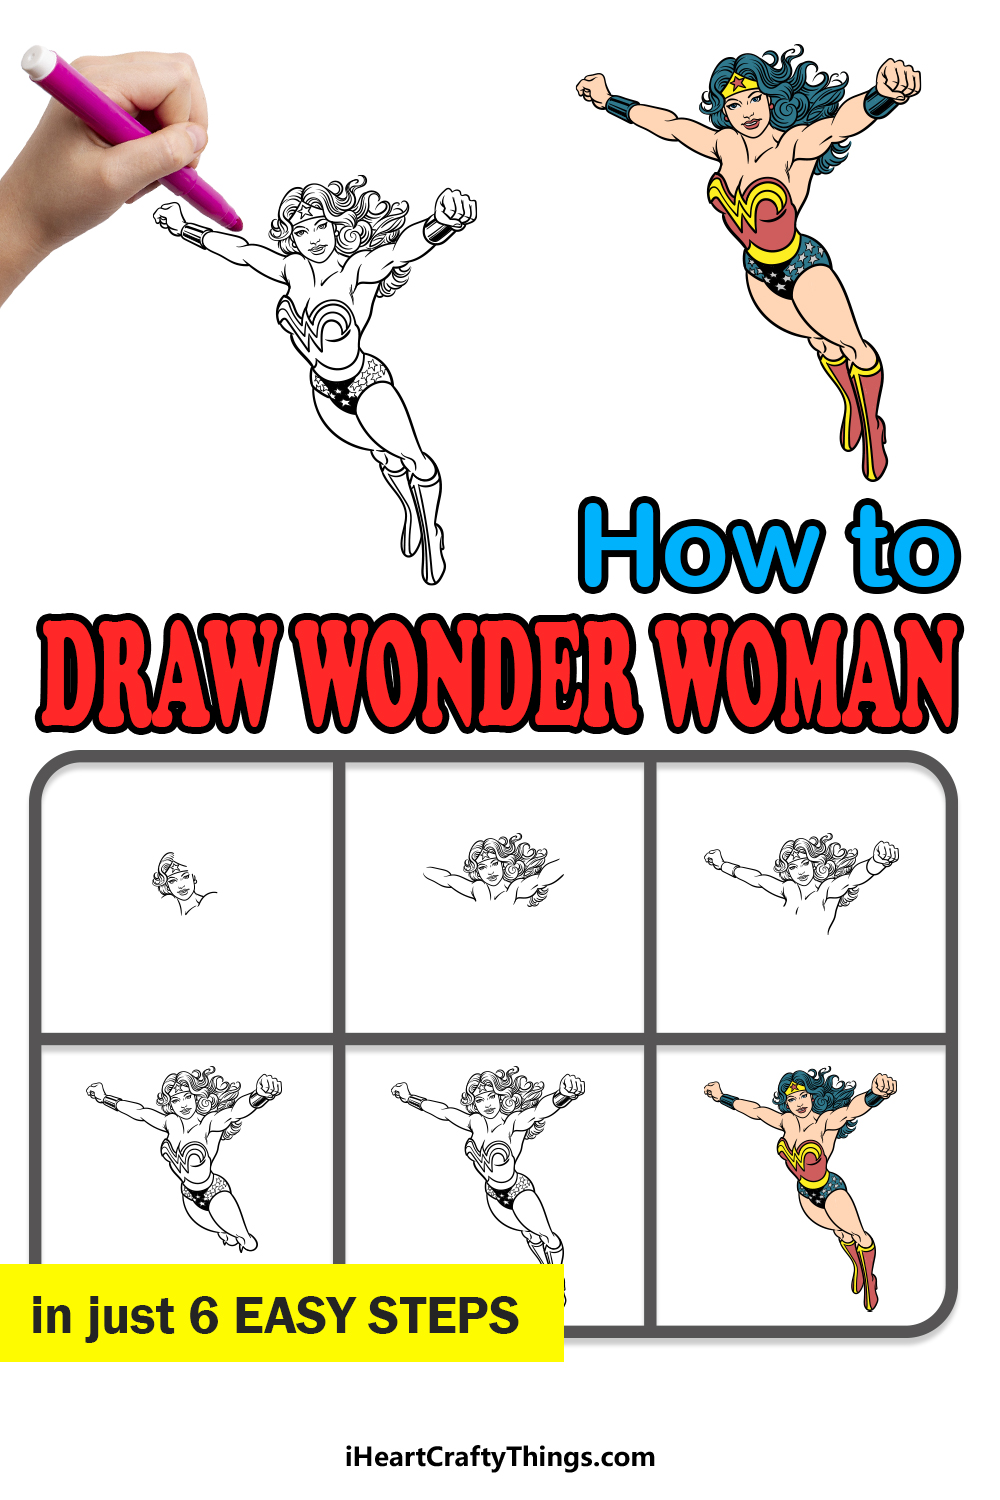 how to draw Wonder Woman in 6 easy steps